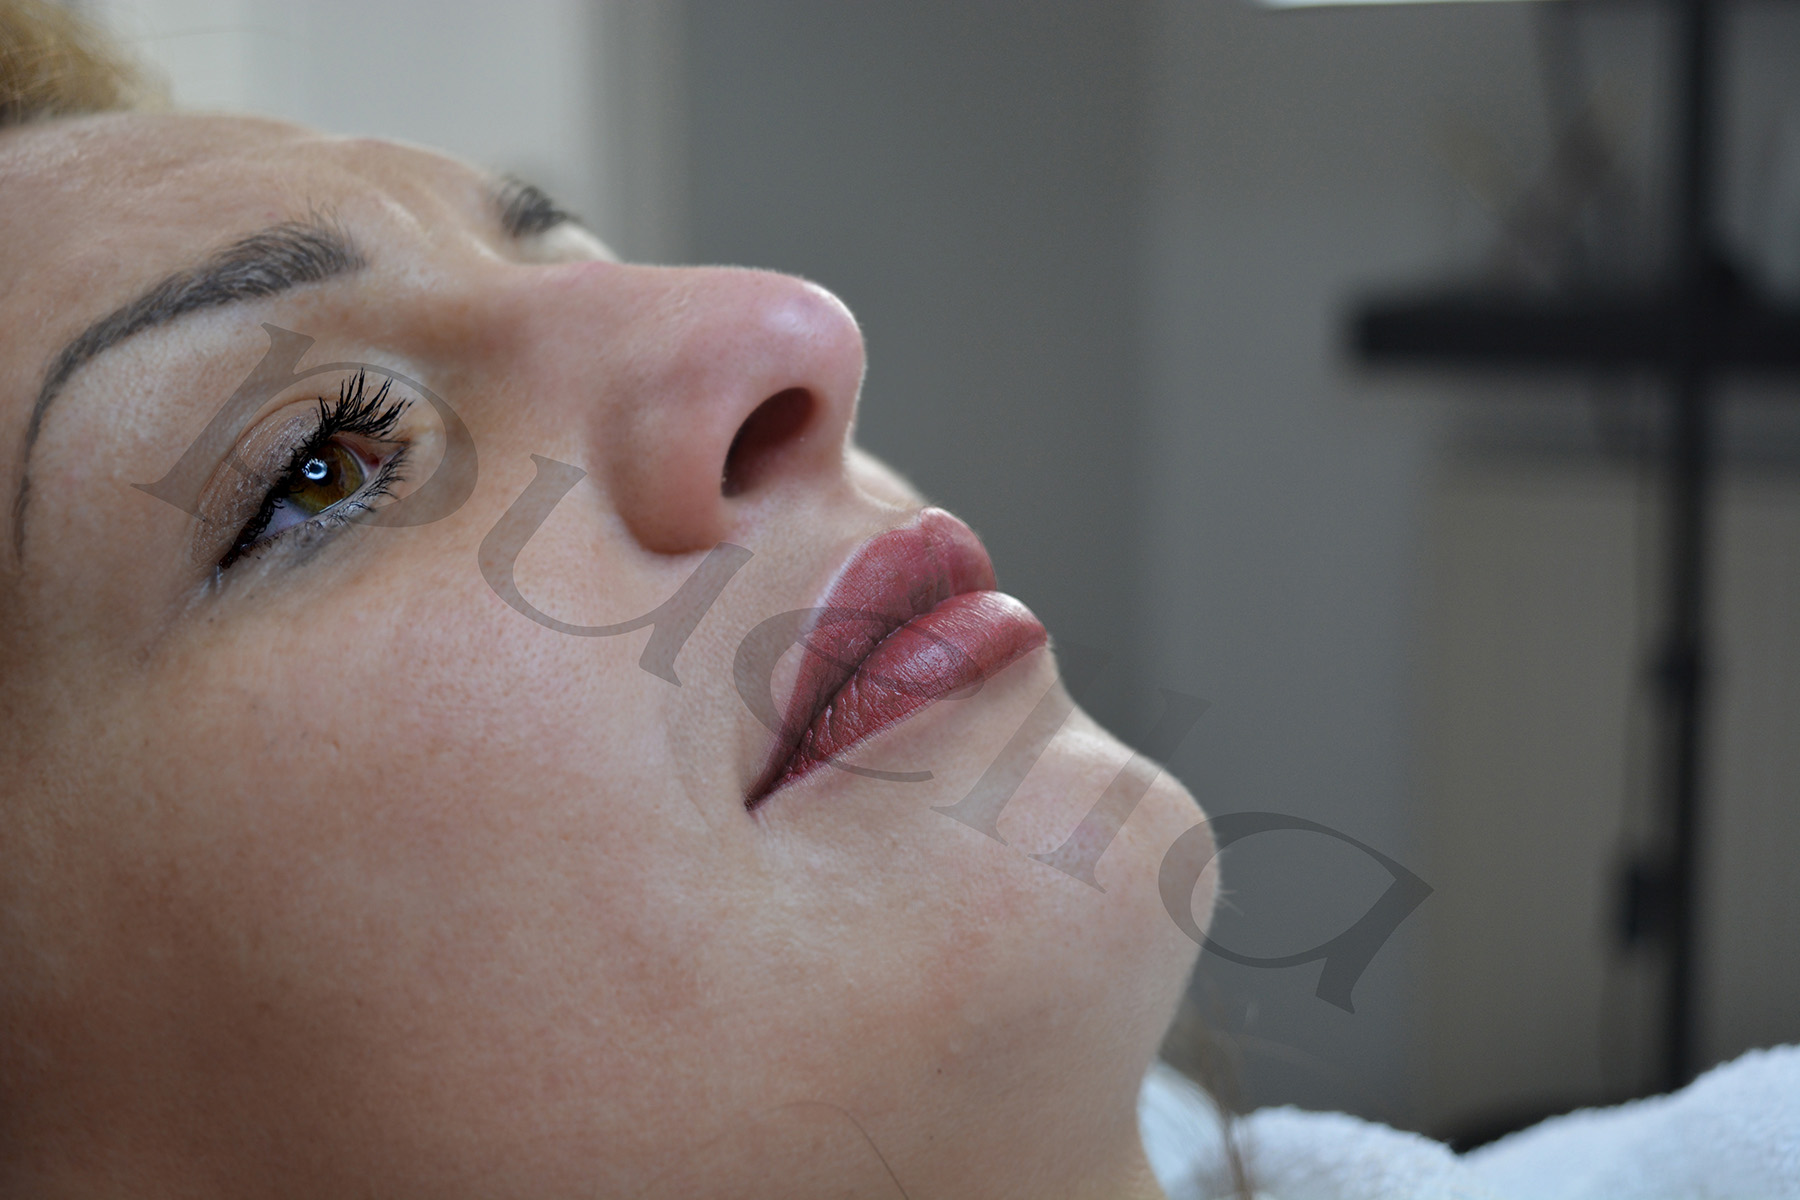 Permanent makeup by Puella Beauty - lips image